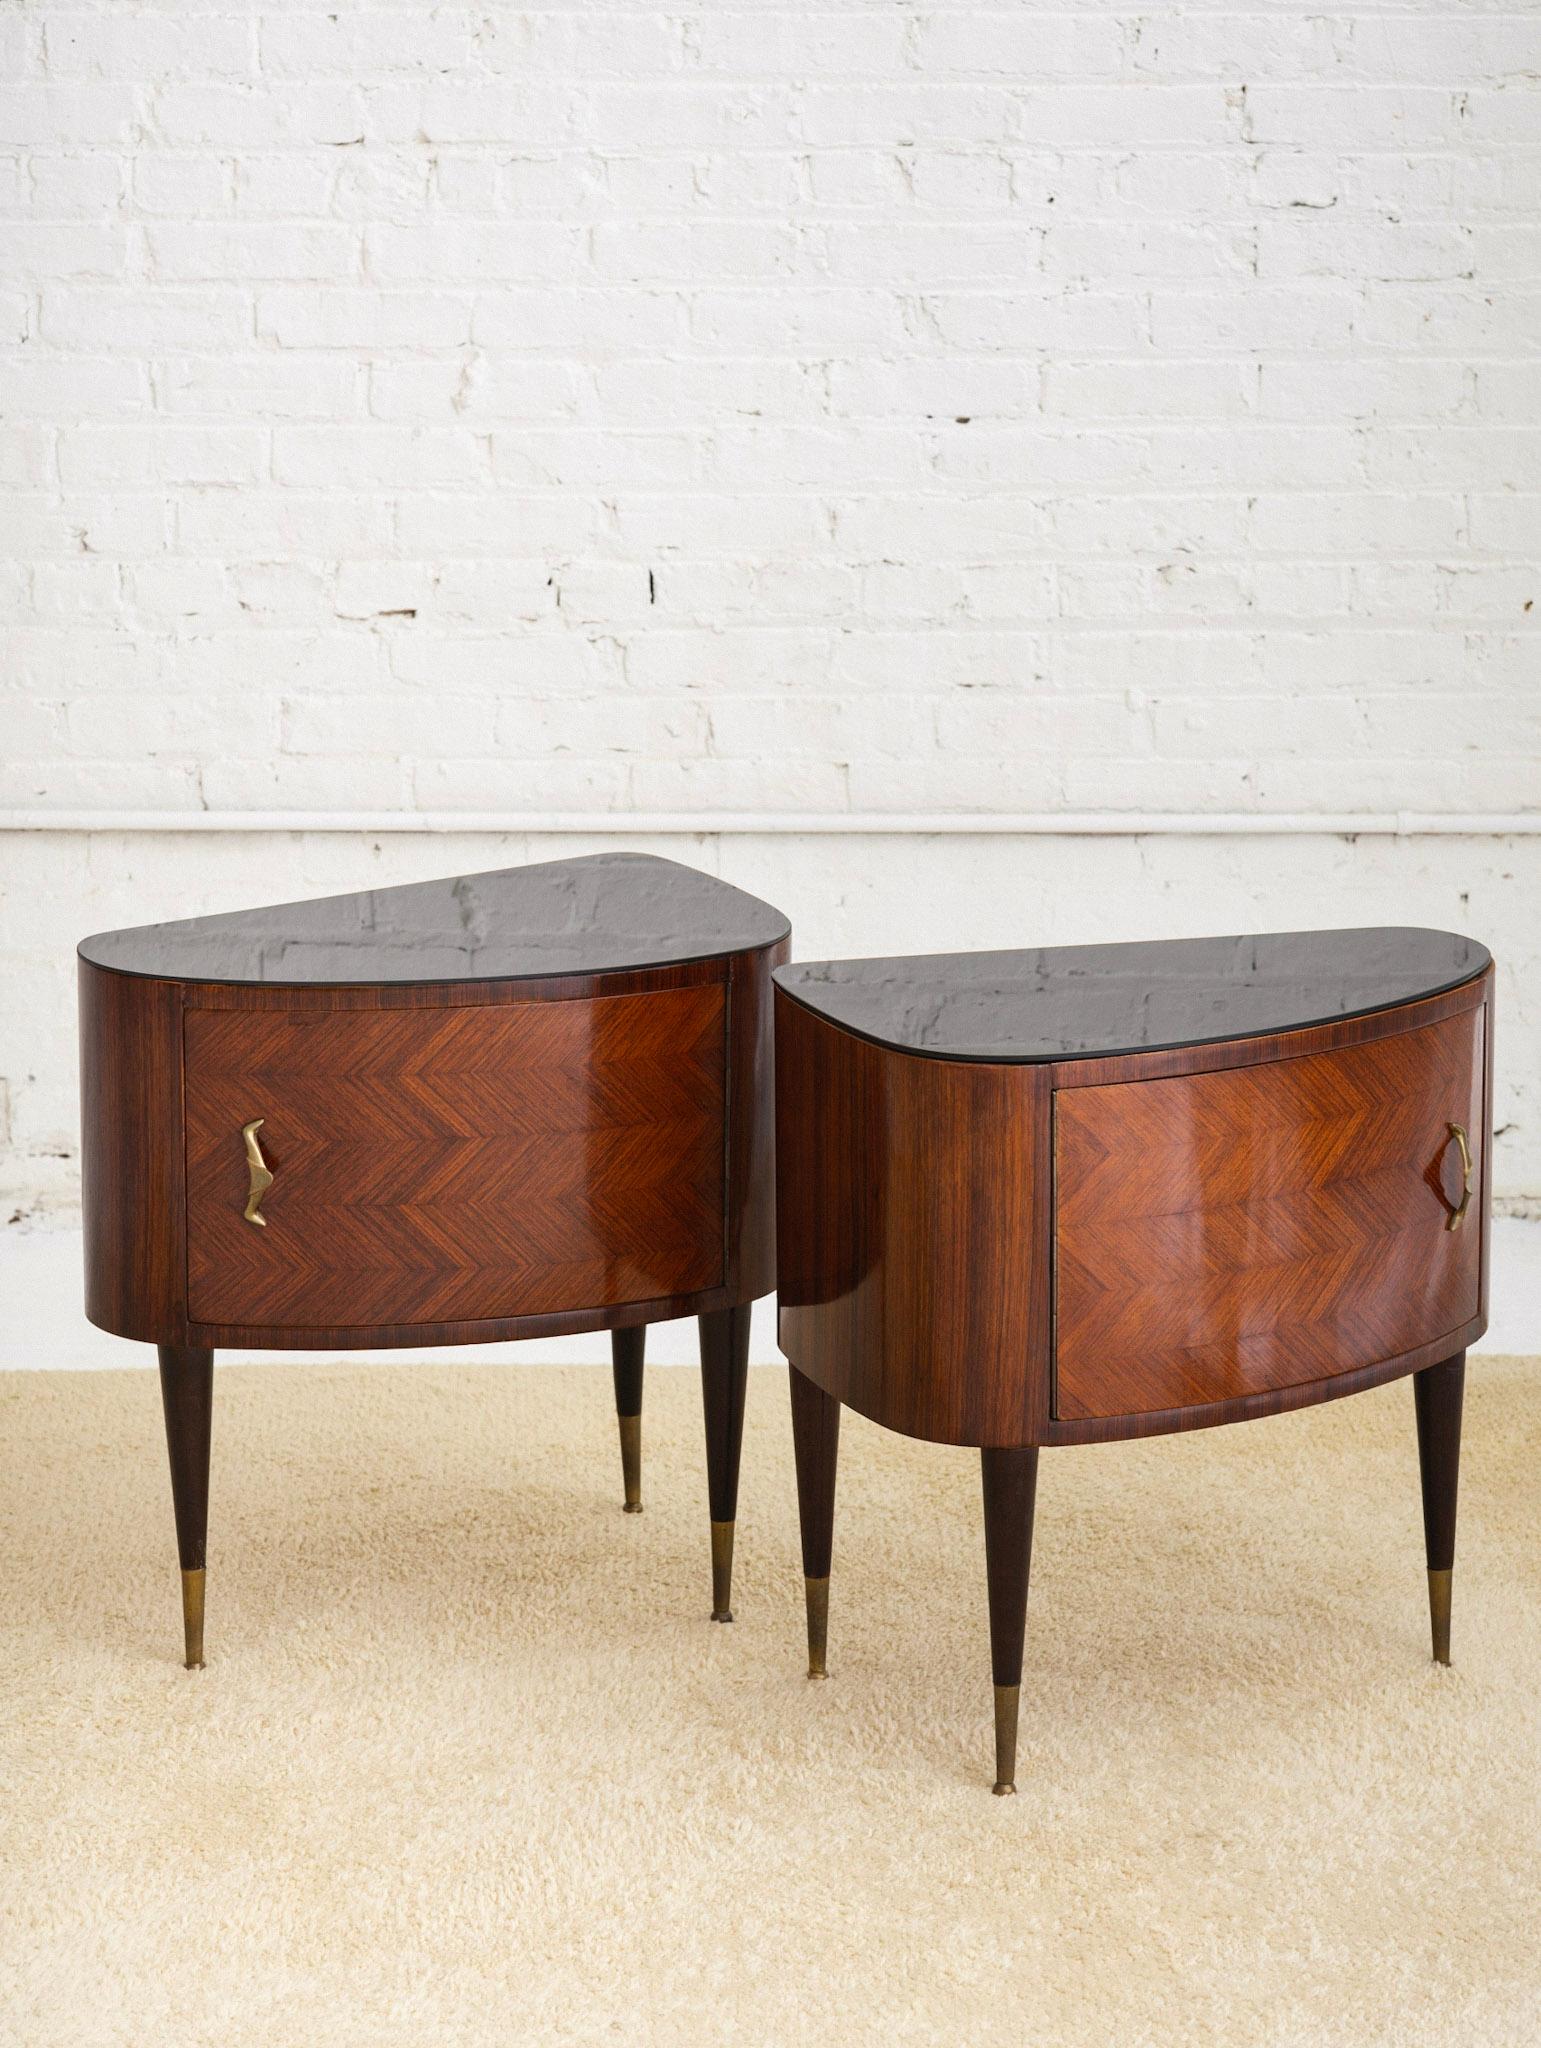 A pair of mid century nightstands in the style of Paolo Buffa. Wood inlay creates a parquet pattern across the front. Rounded front gives a 